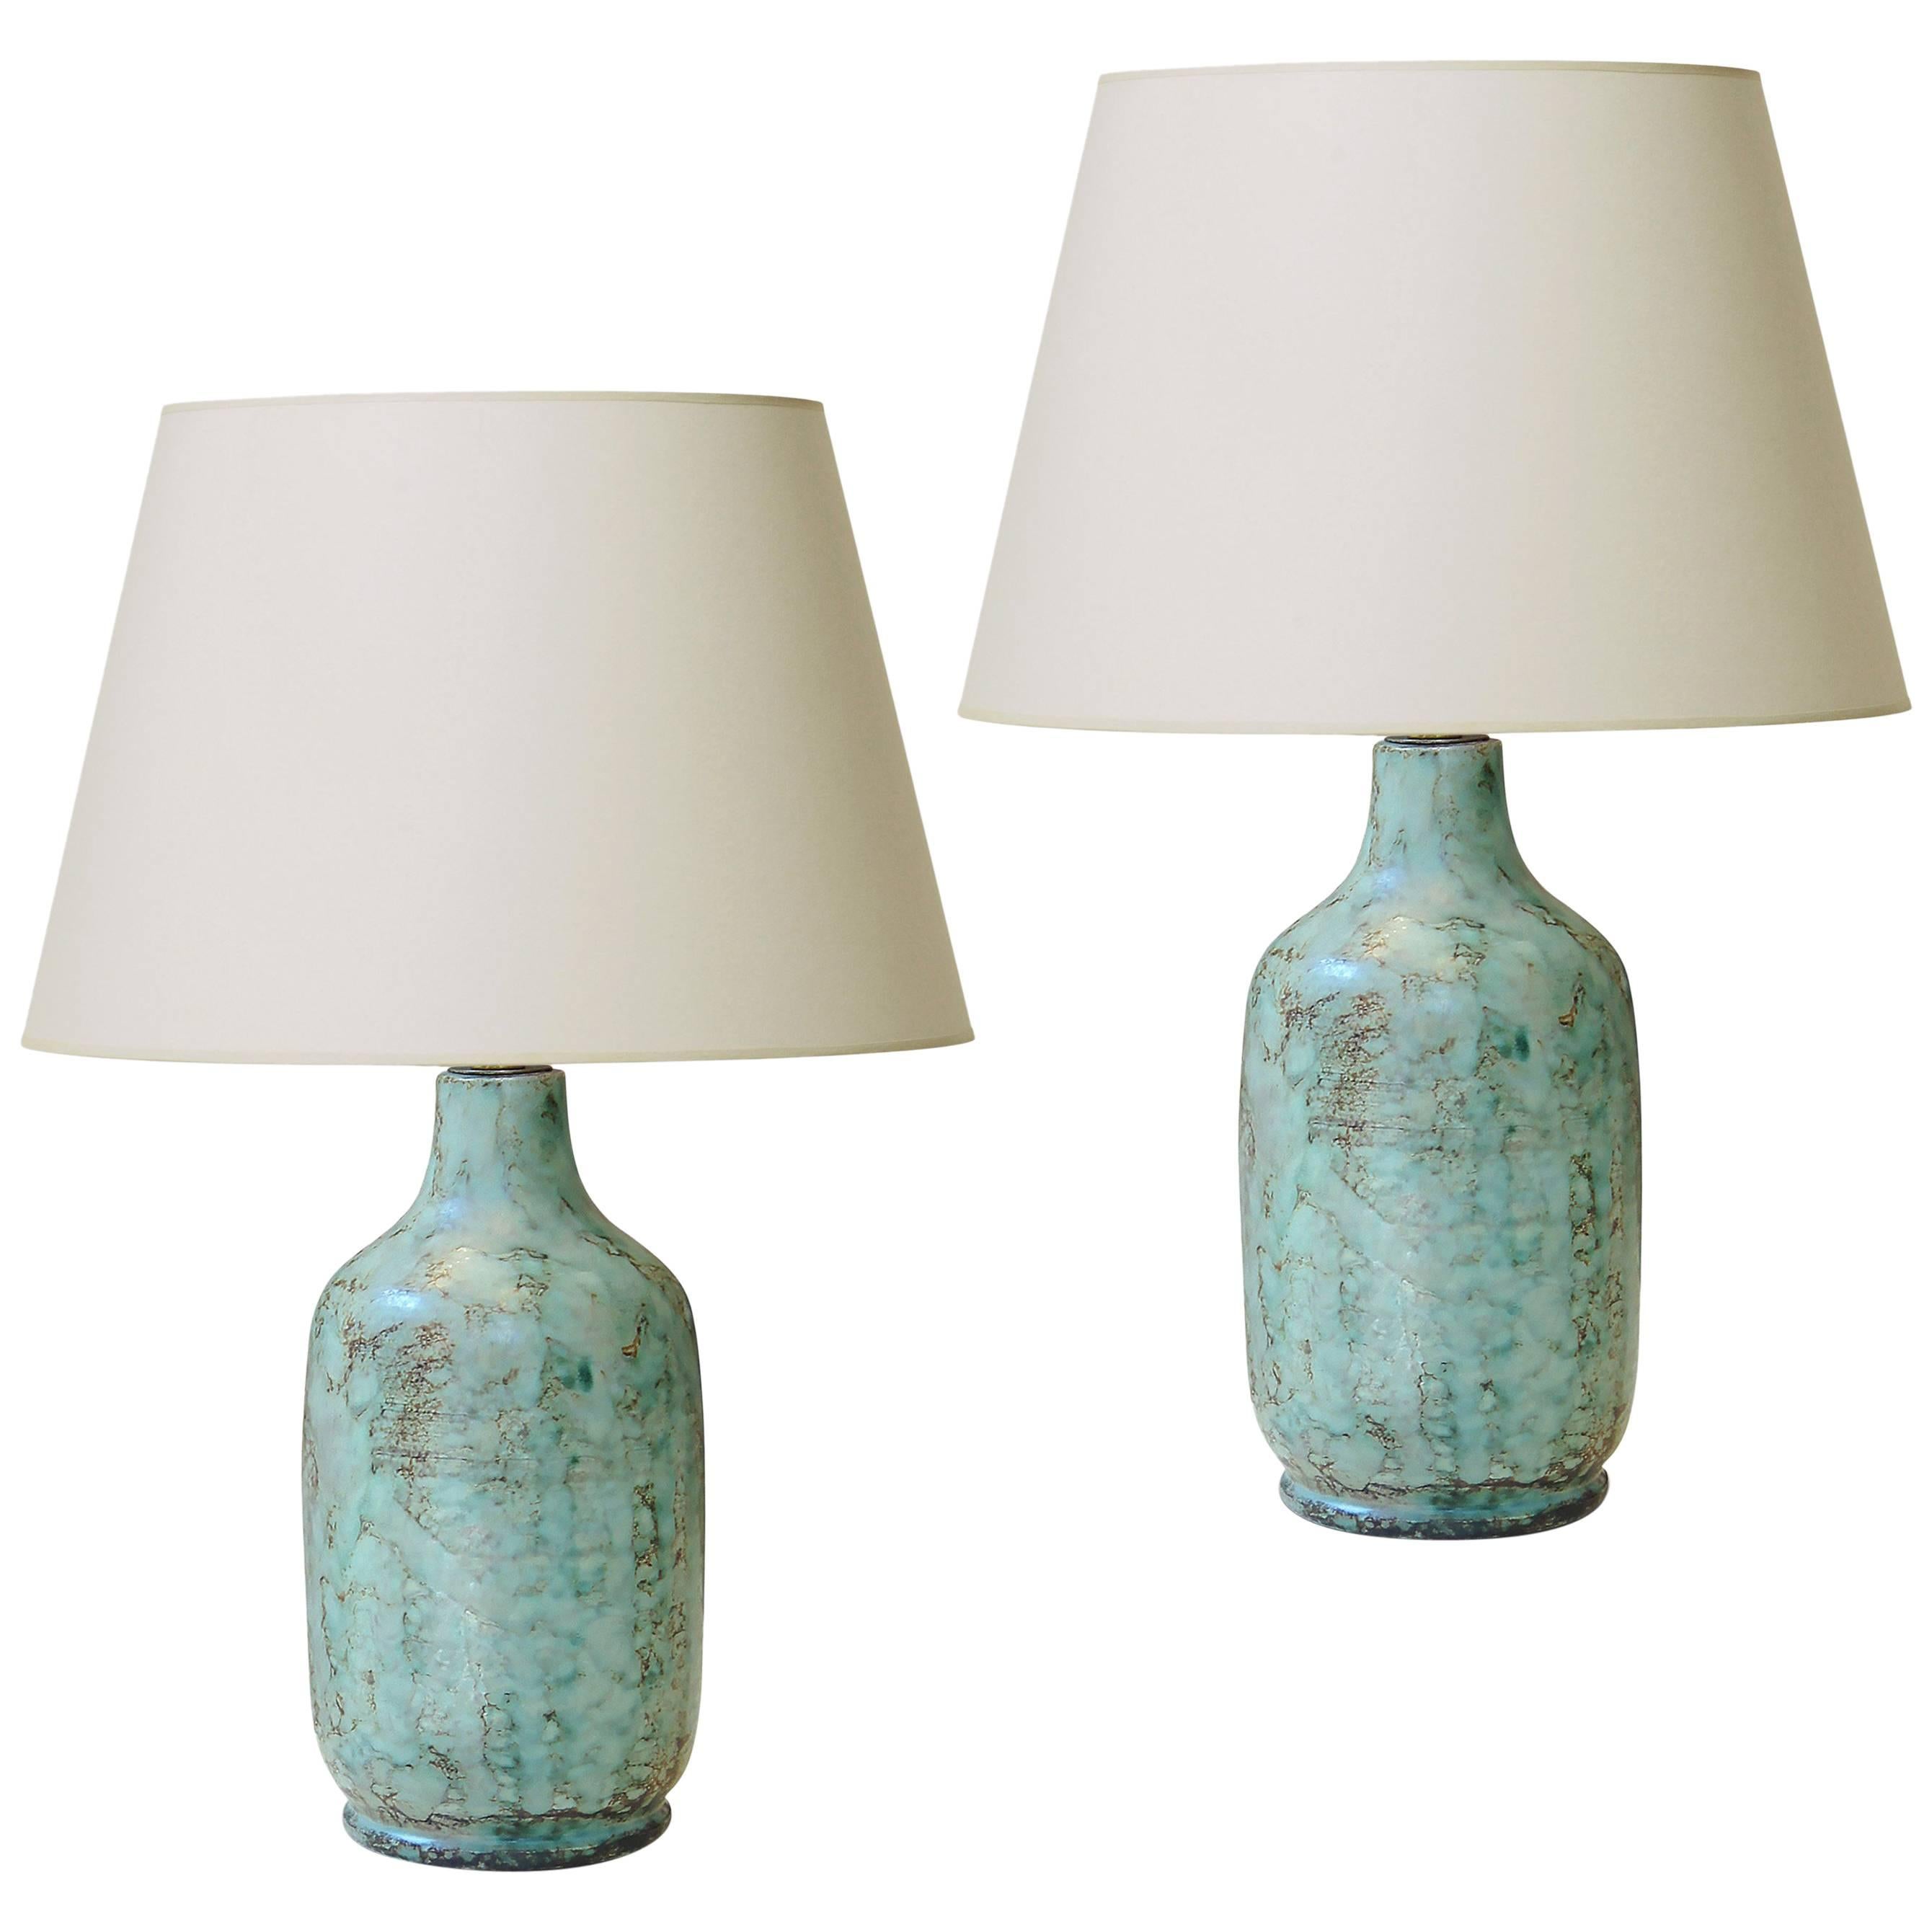 Pair of Table Lamps with Stylish Green Tint Enameling by Vallauris Ceramist For Sale